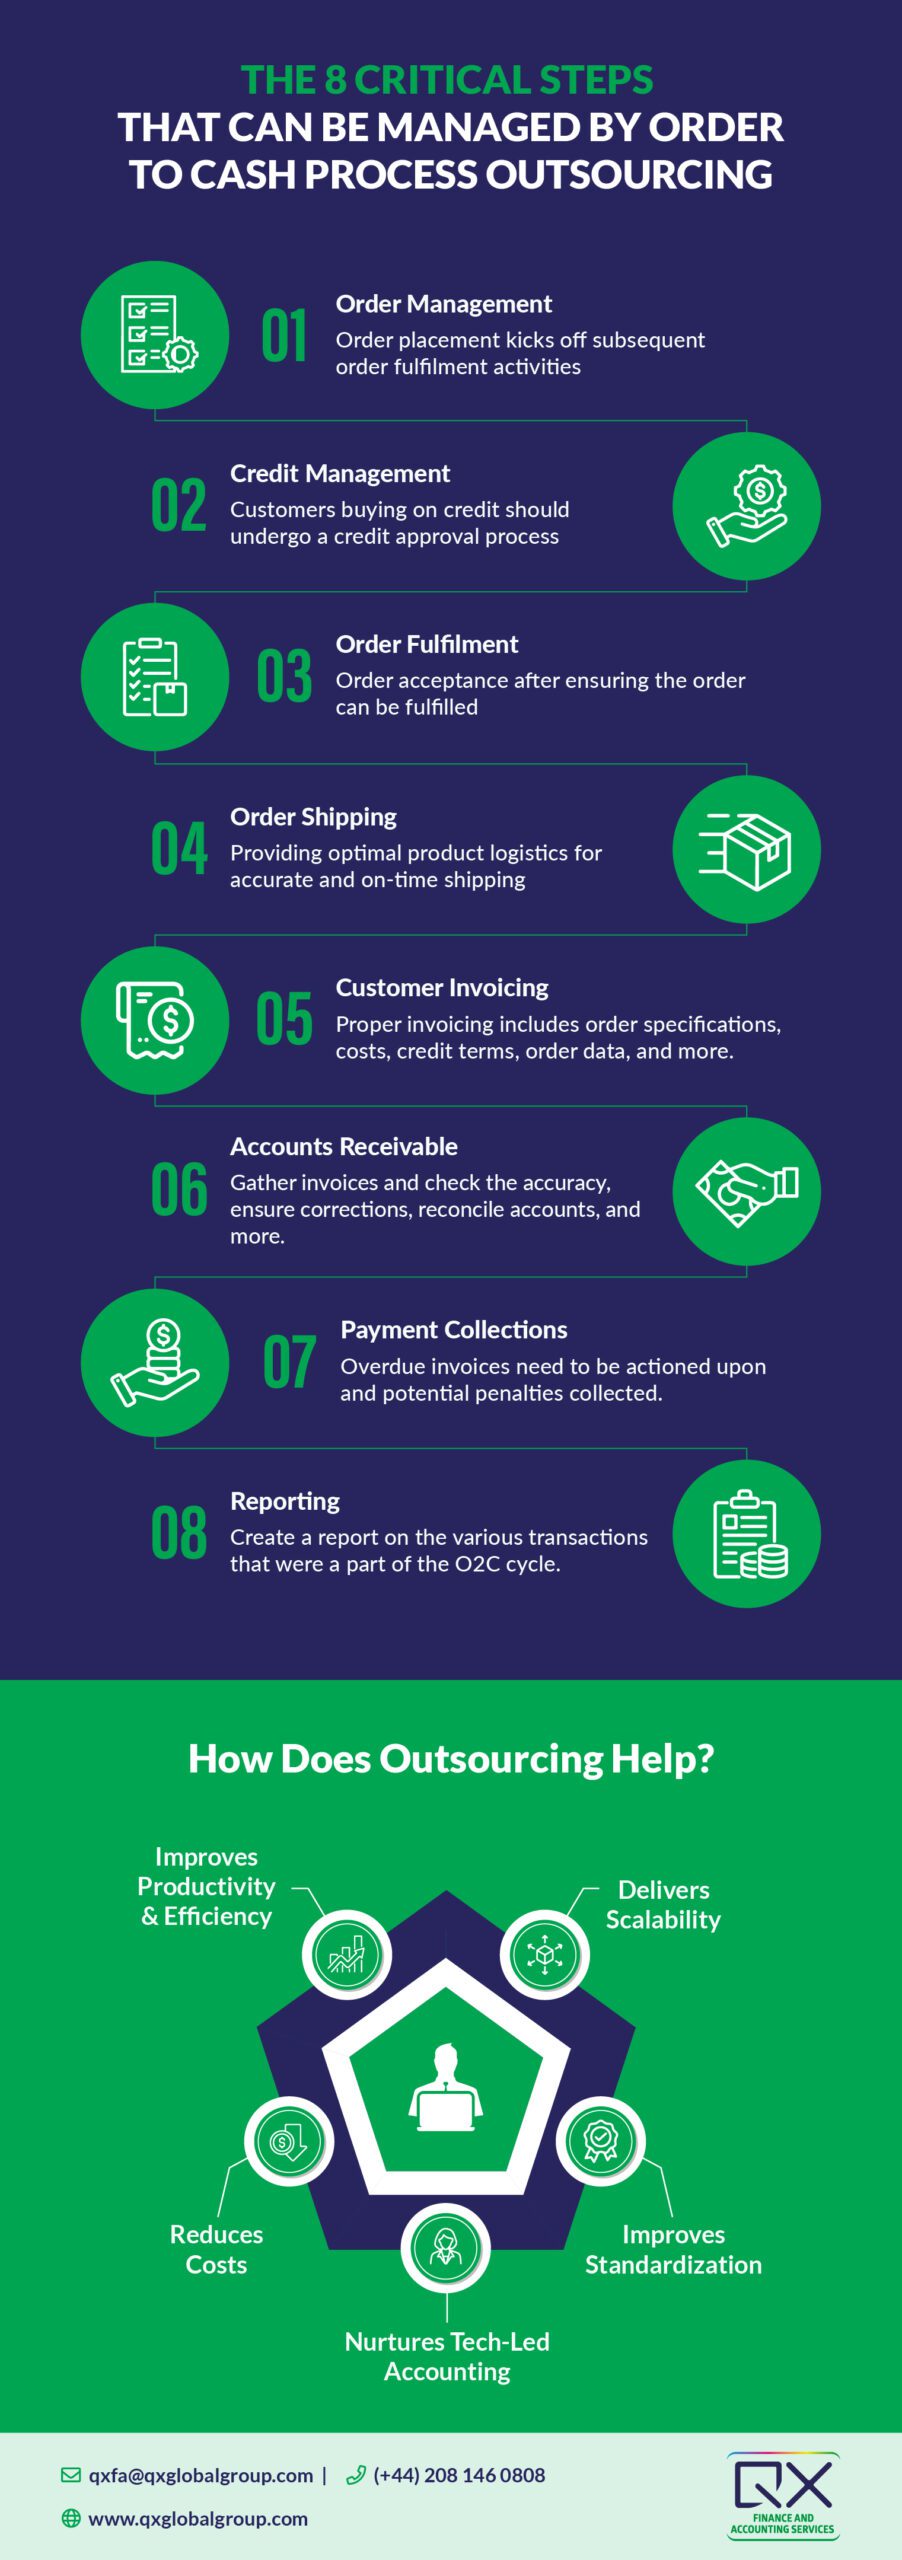 order-to-cash-process-outsourcing-infographic/